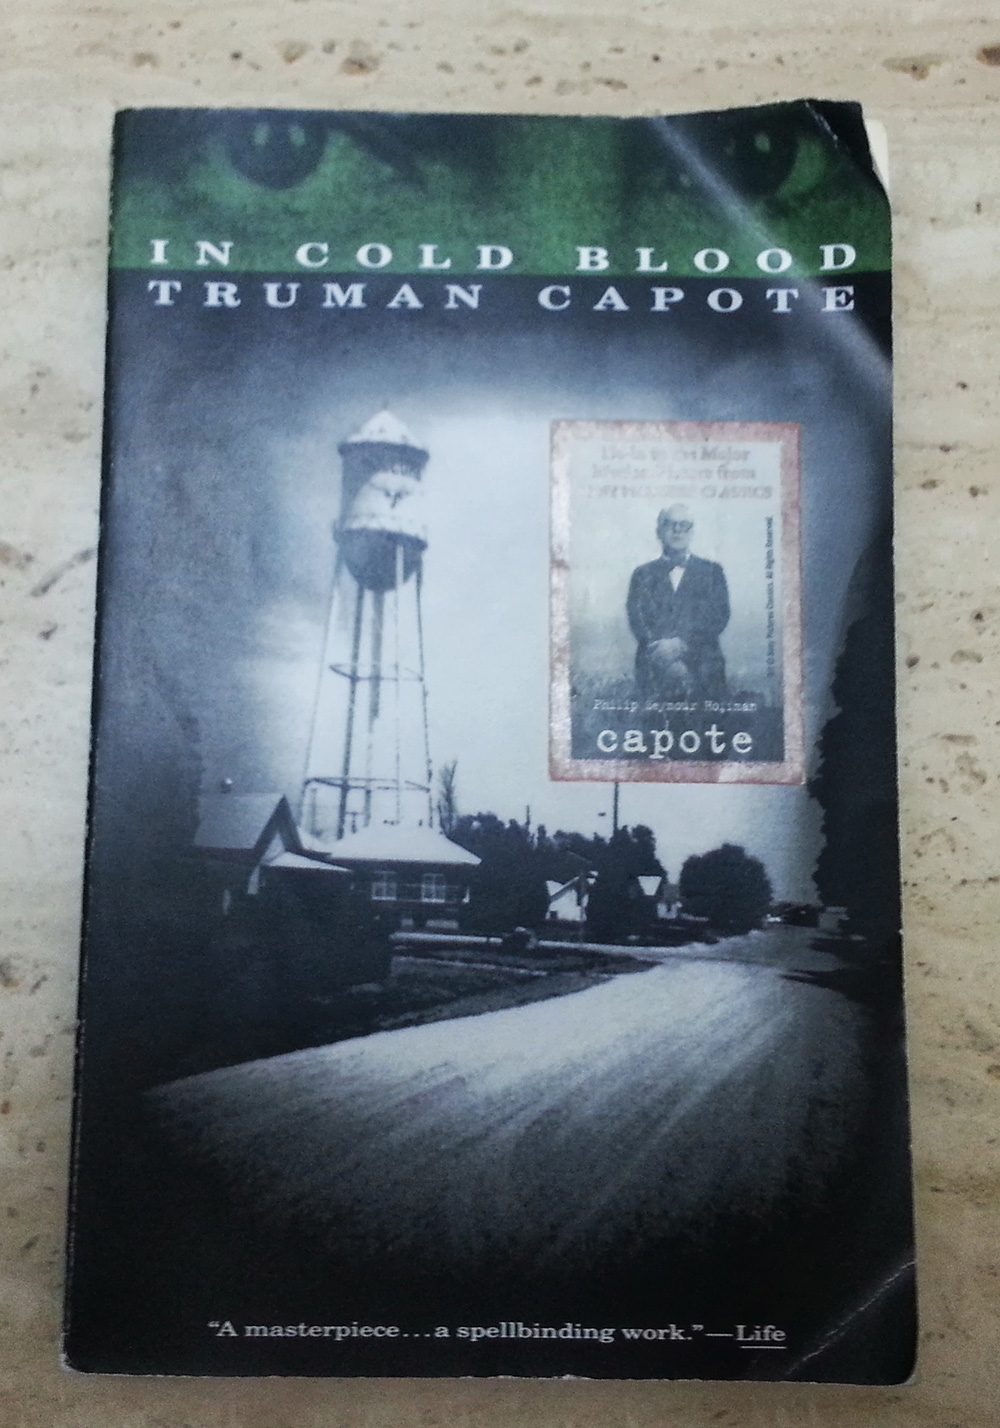 Book Cover, Truman Capote, In Cold Blood